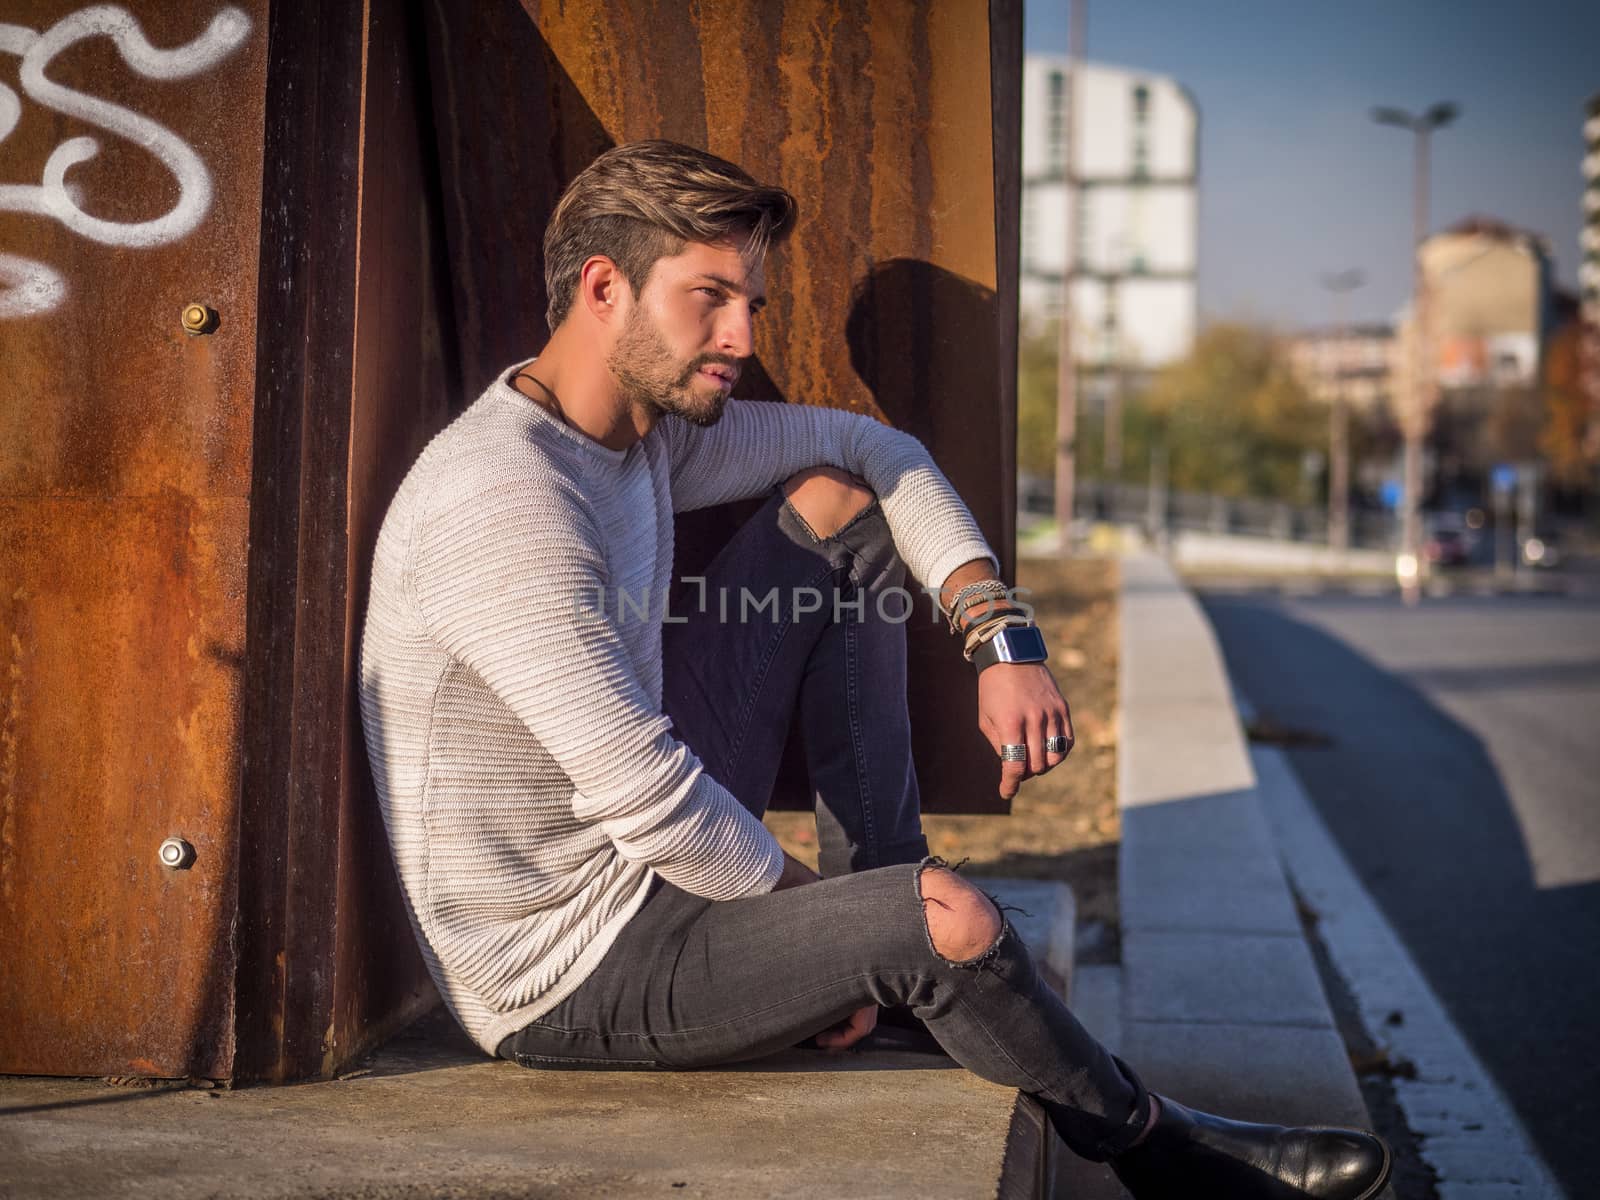 One handsome man in city setting by artofphoto